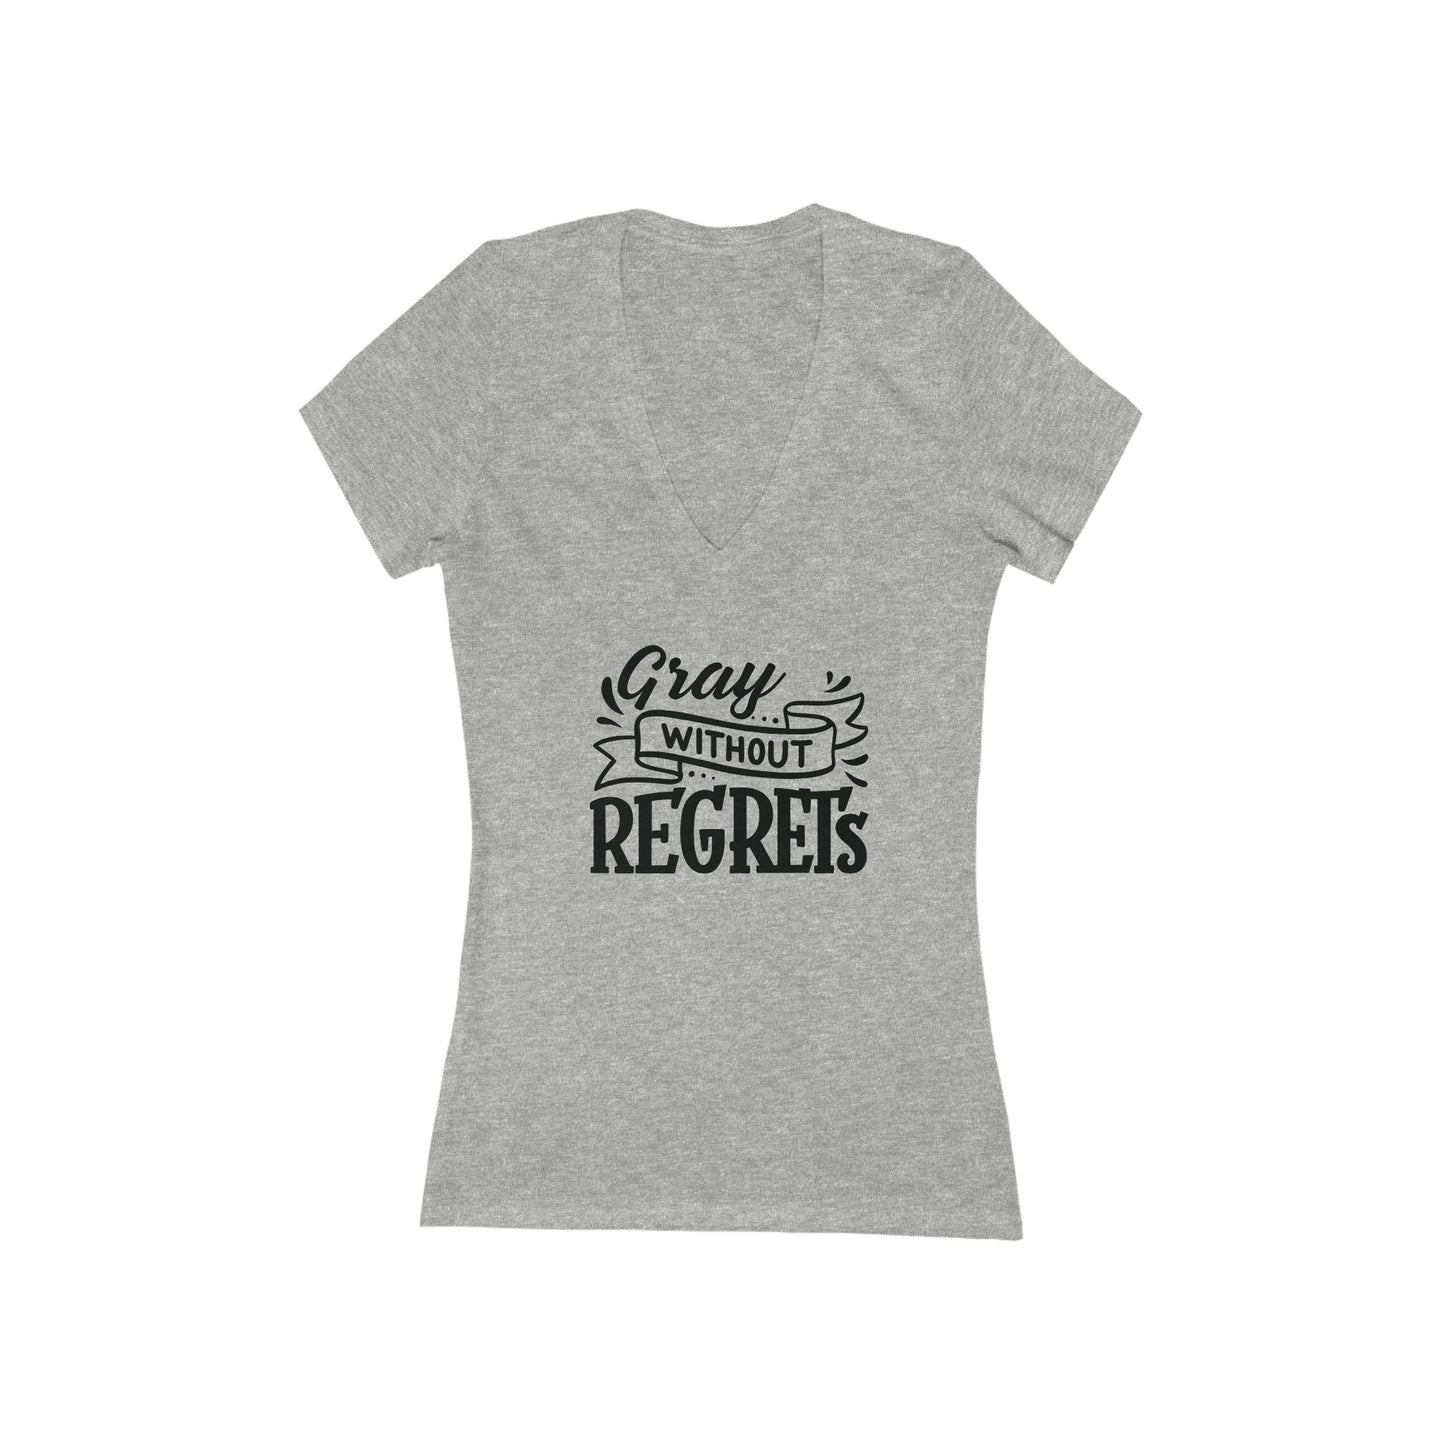 GRAY Without Regrets, short sleeve deep v-neck t-shirt, for women embracing silver and gray hair